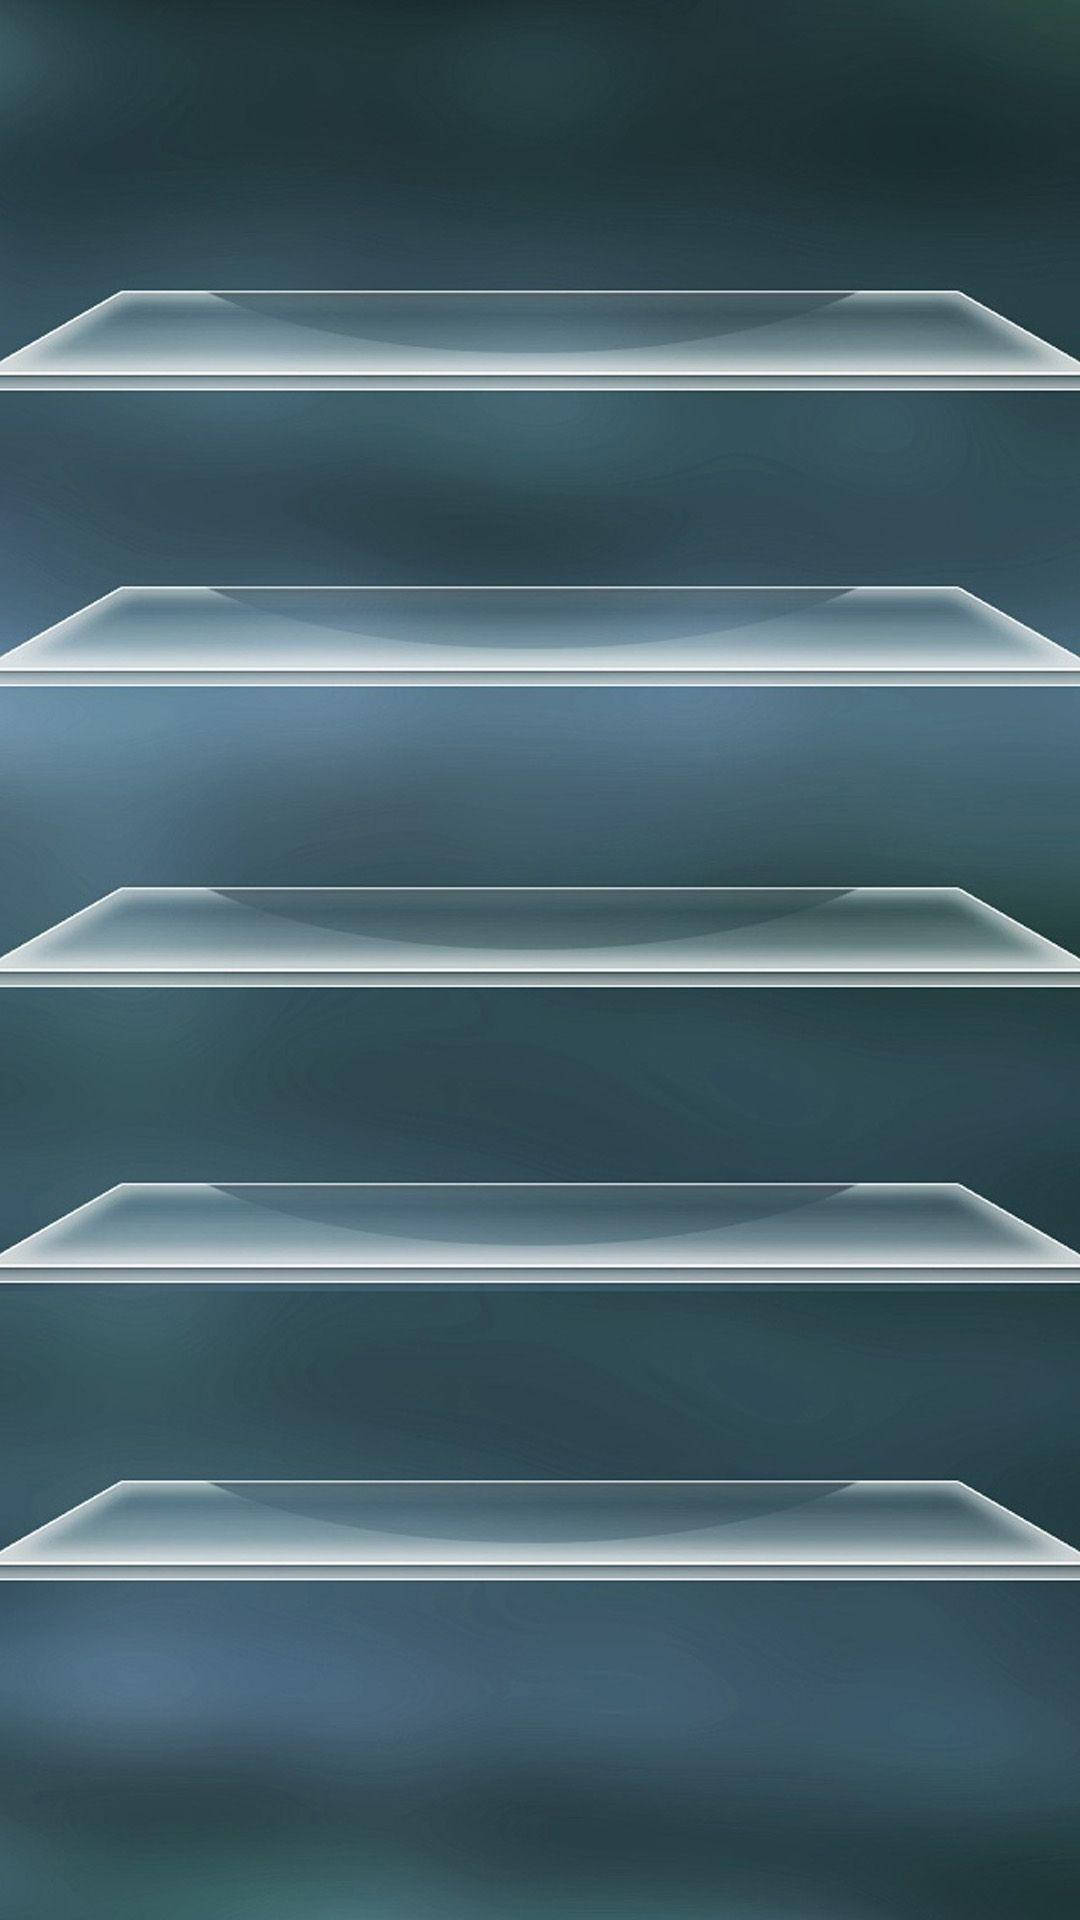 Glass Shelves Iphone 6s Plus Background